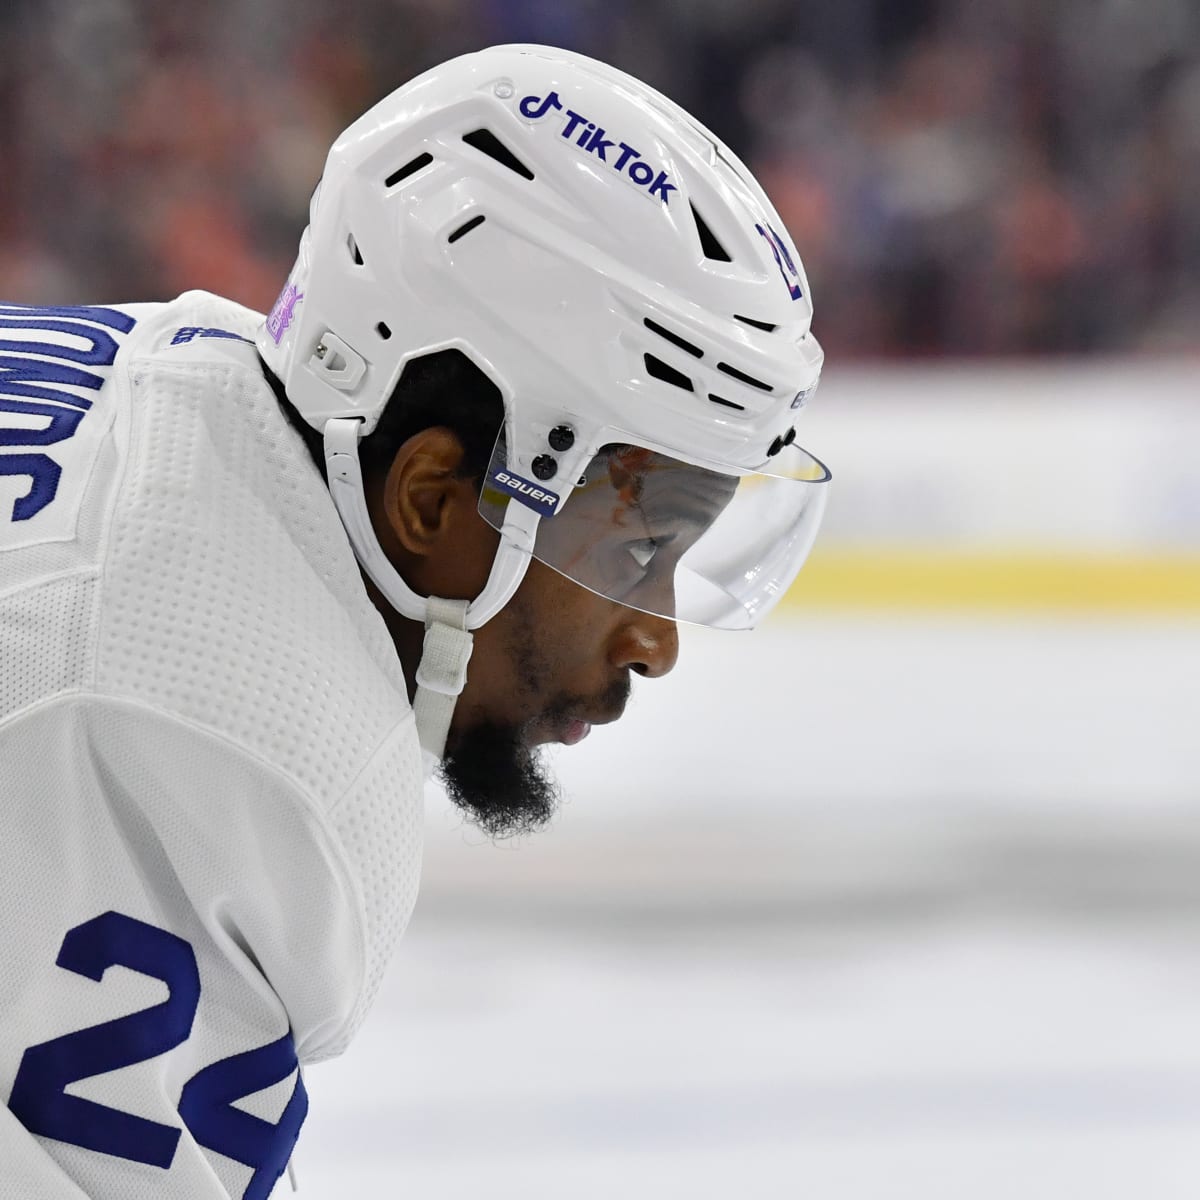 Maple Leafs winger Wayne Simmonds to miss six weeks with broken